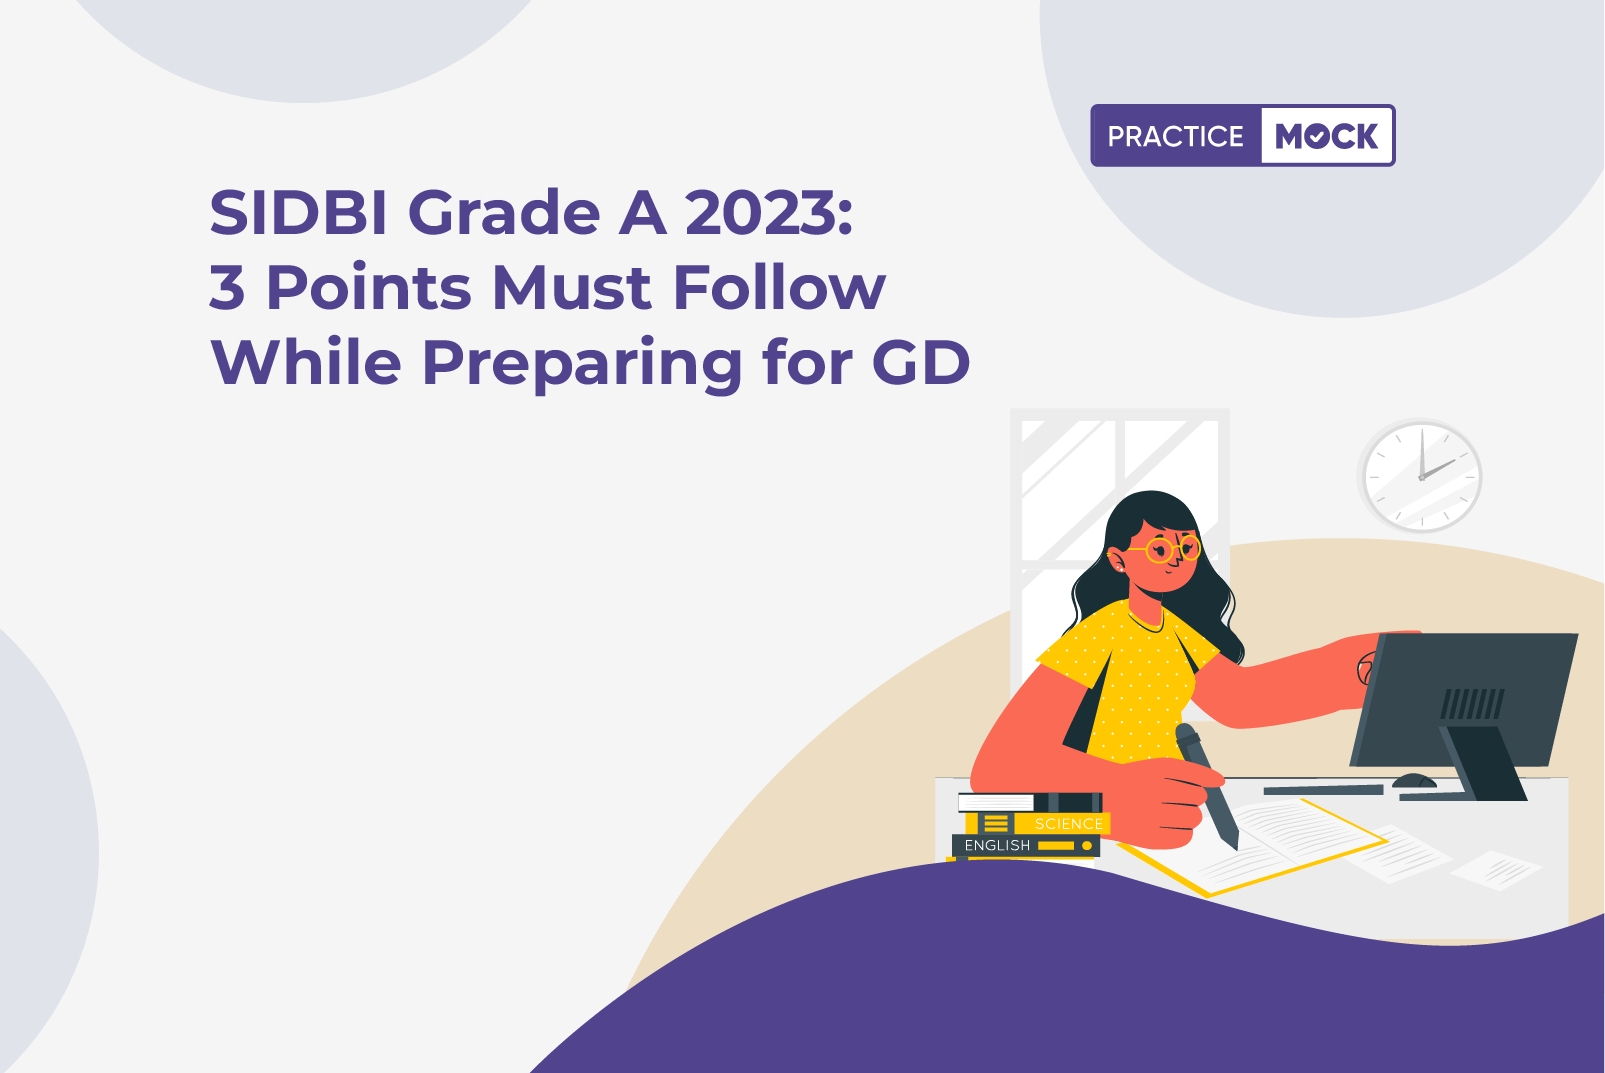 SIDBI Grade A 2023 3 Points Must Follow While Preparing for GD